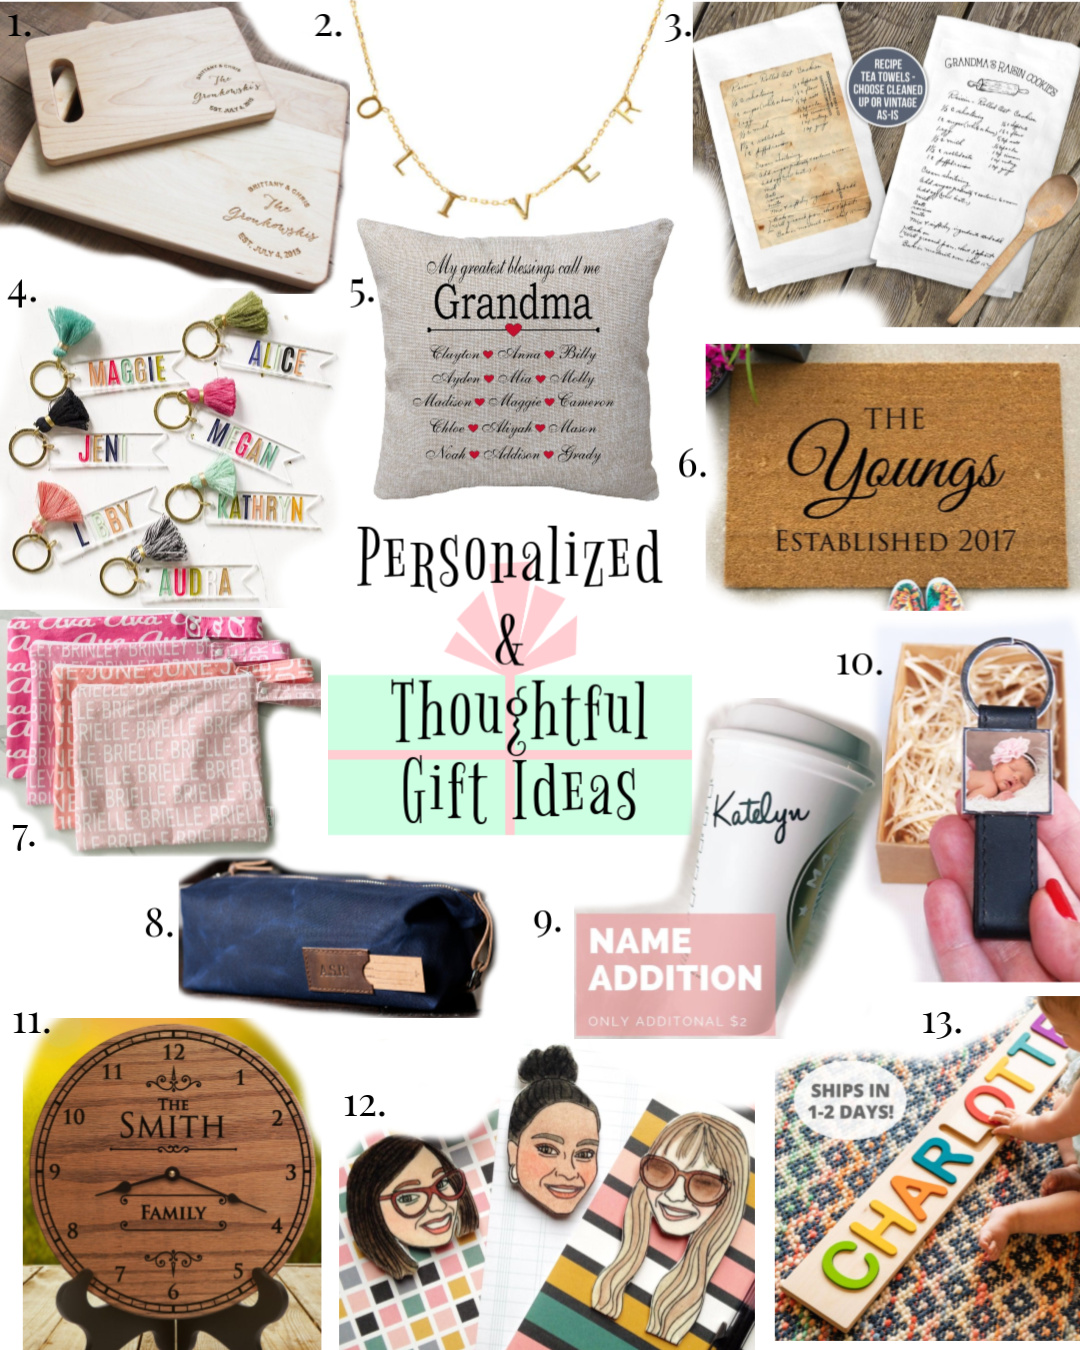 Personalized and Thoughtful Gifts from Etsy, Personalized Holiday gifts, gifts for difficult people